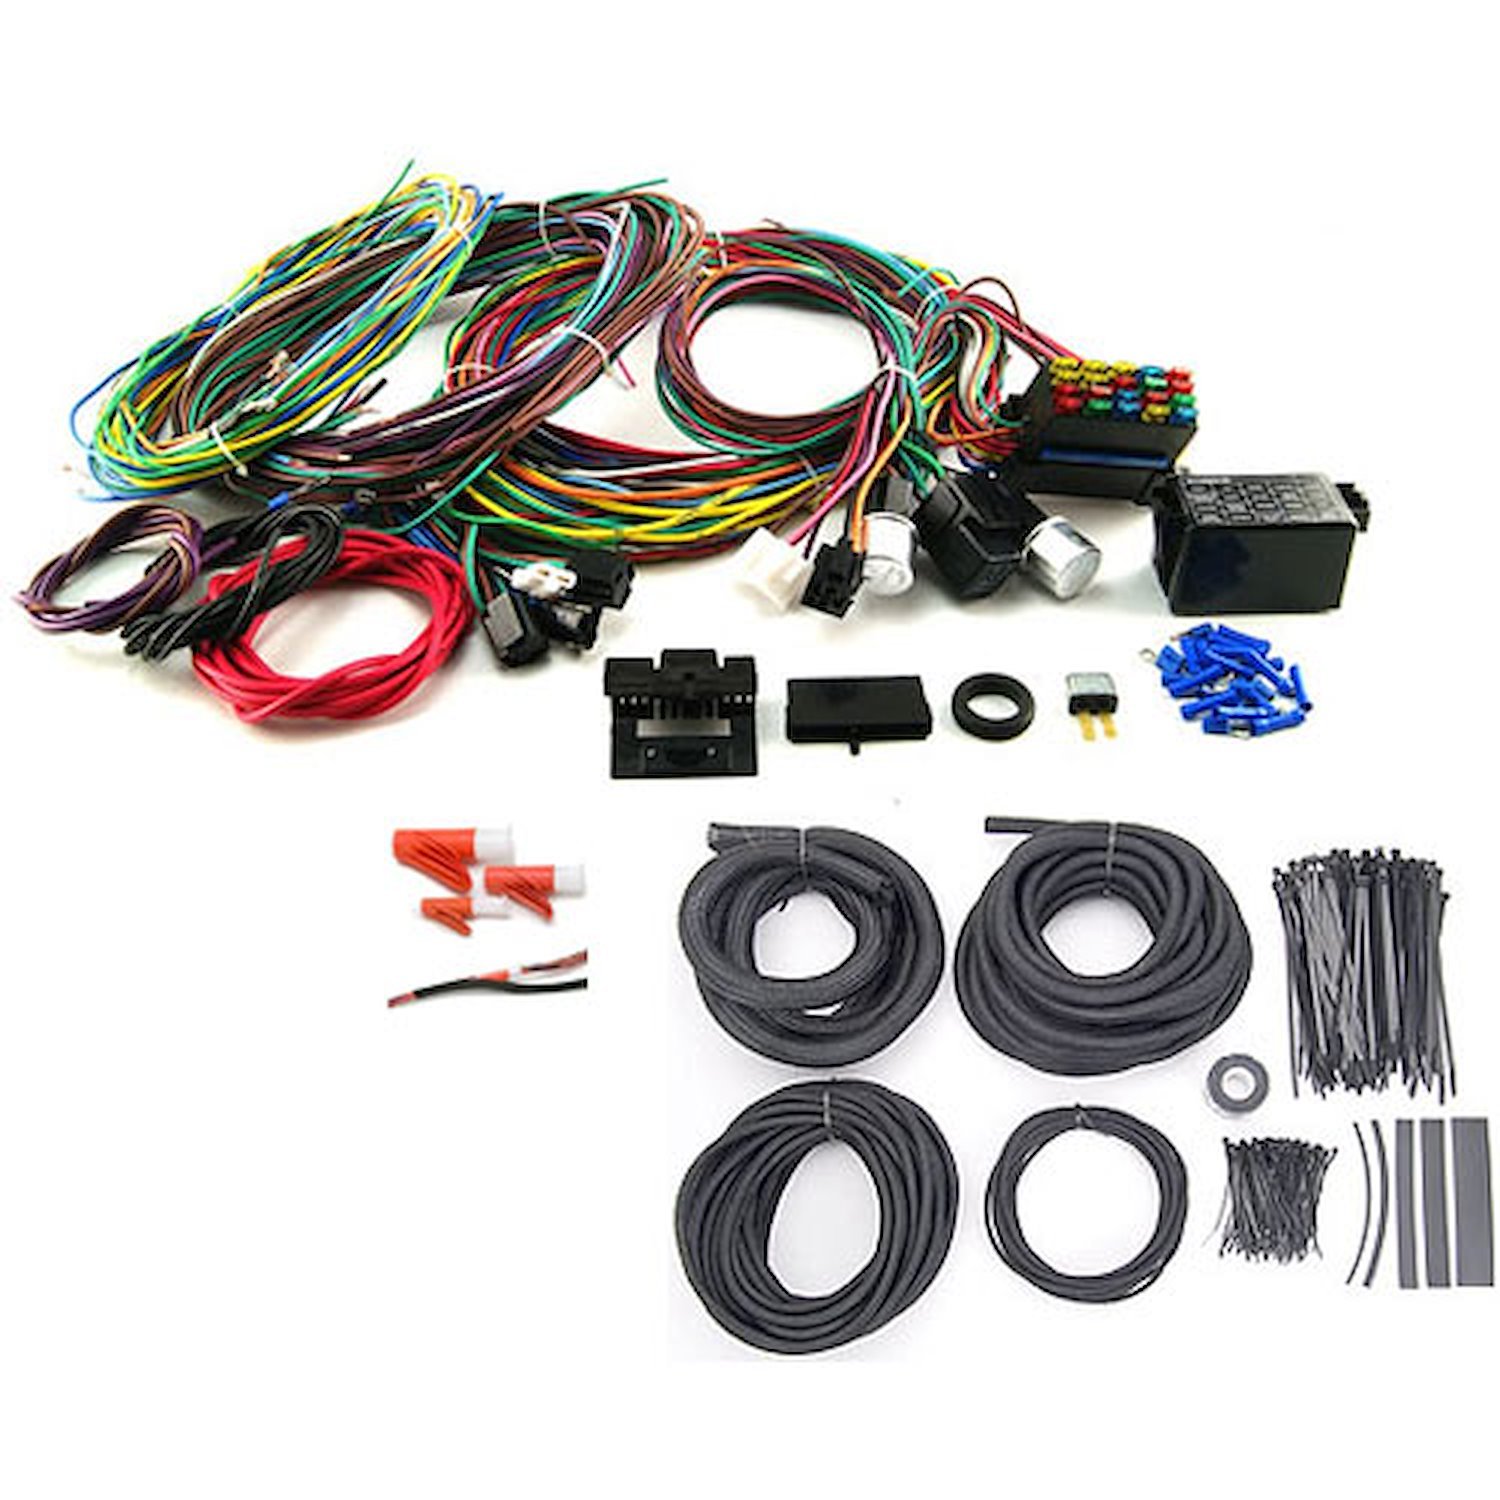 20-Circuit Wiring Harness Kit Includes: Speedmaster 20-Circuit Wiring Harness Kit